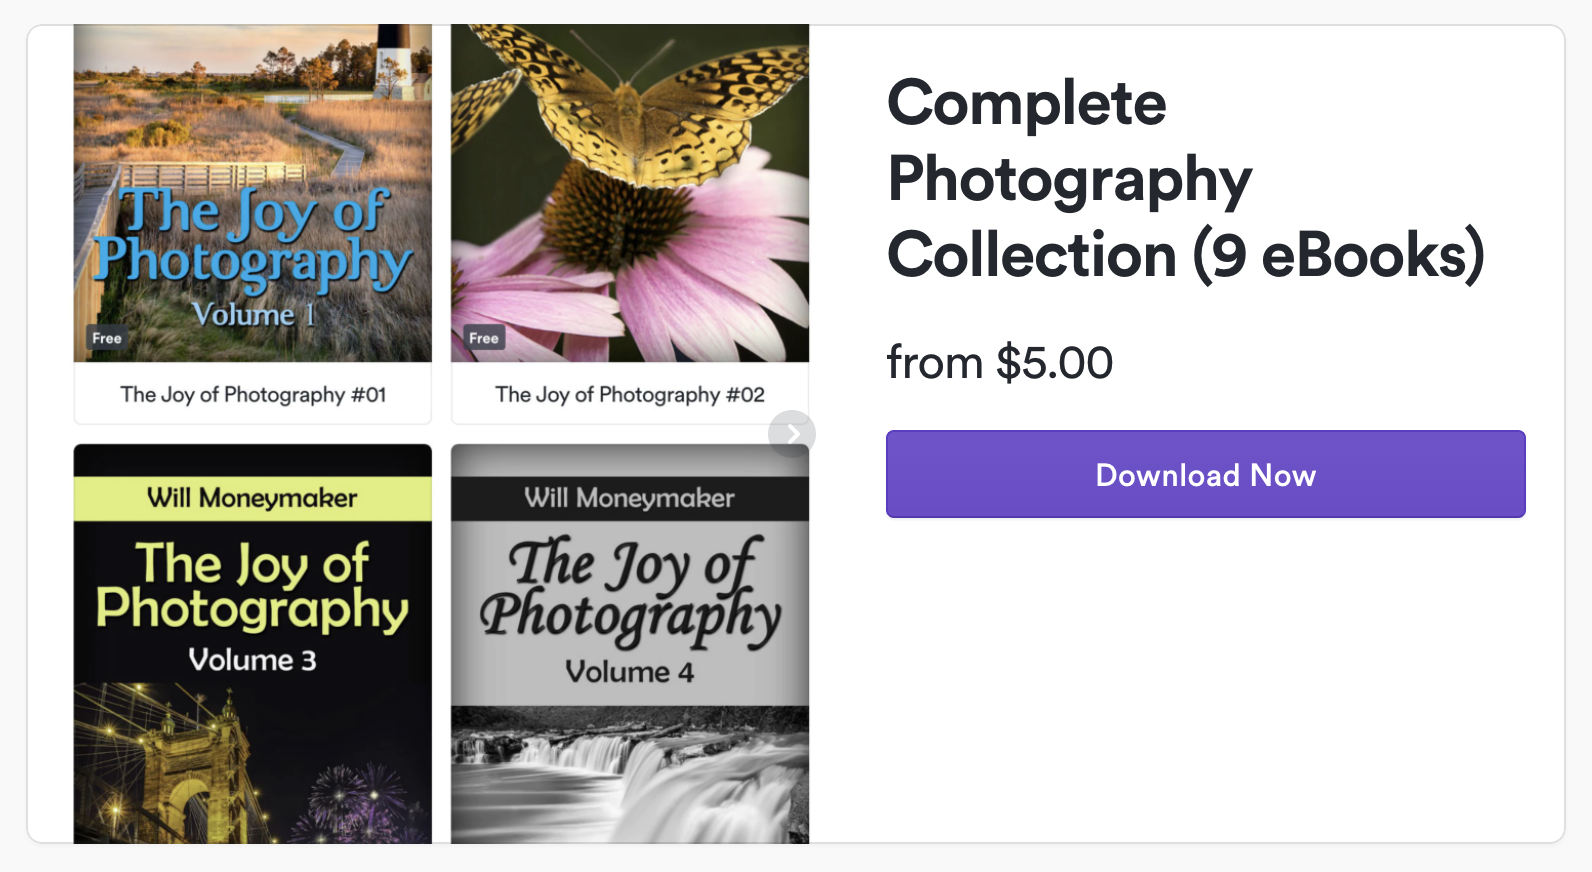 Complete Photography Collection (9 eBooks)